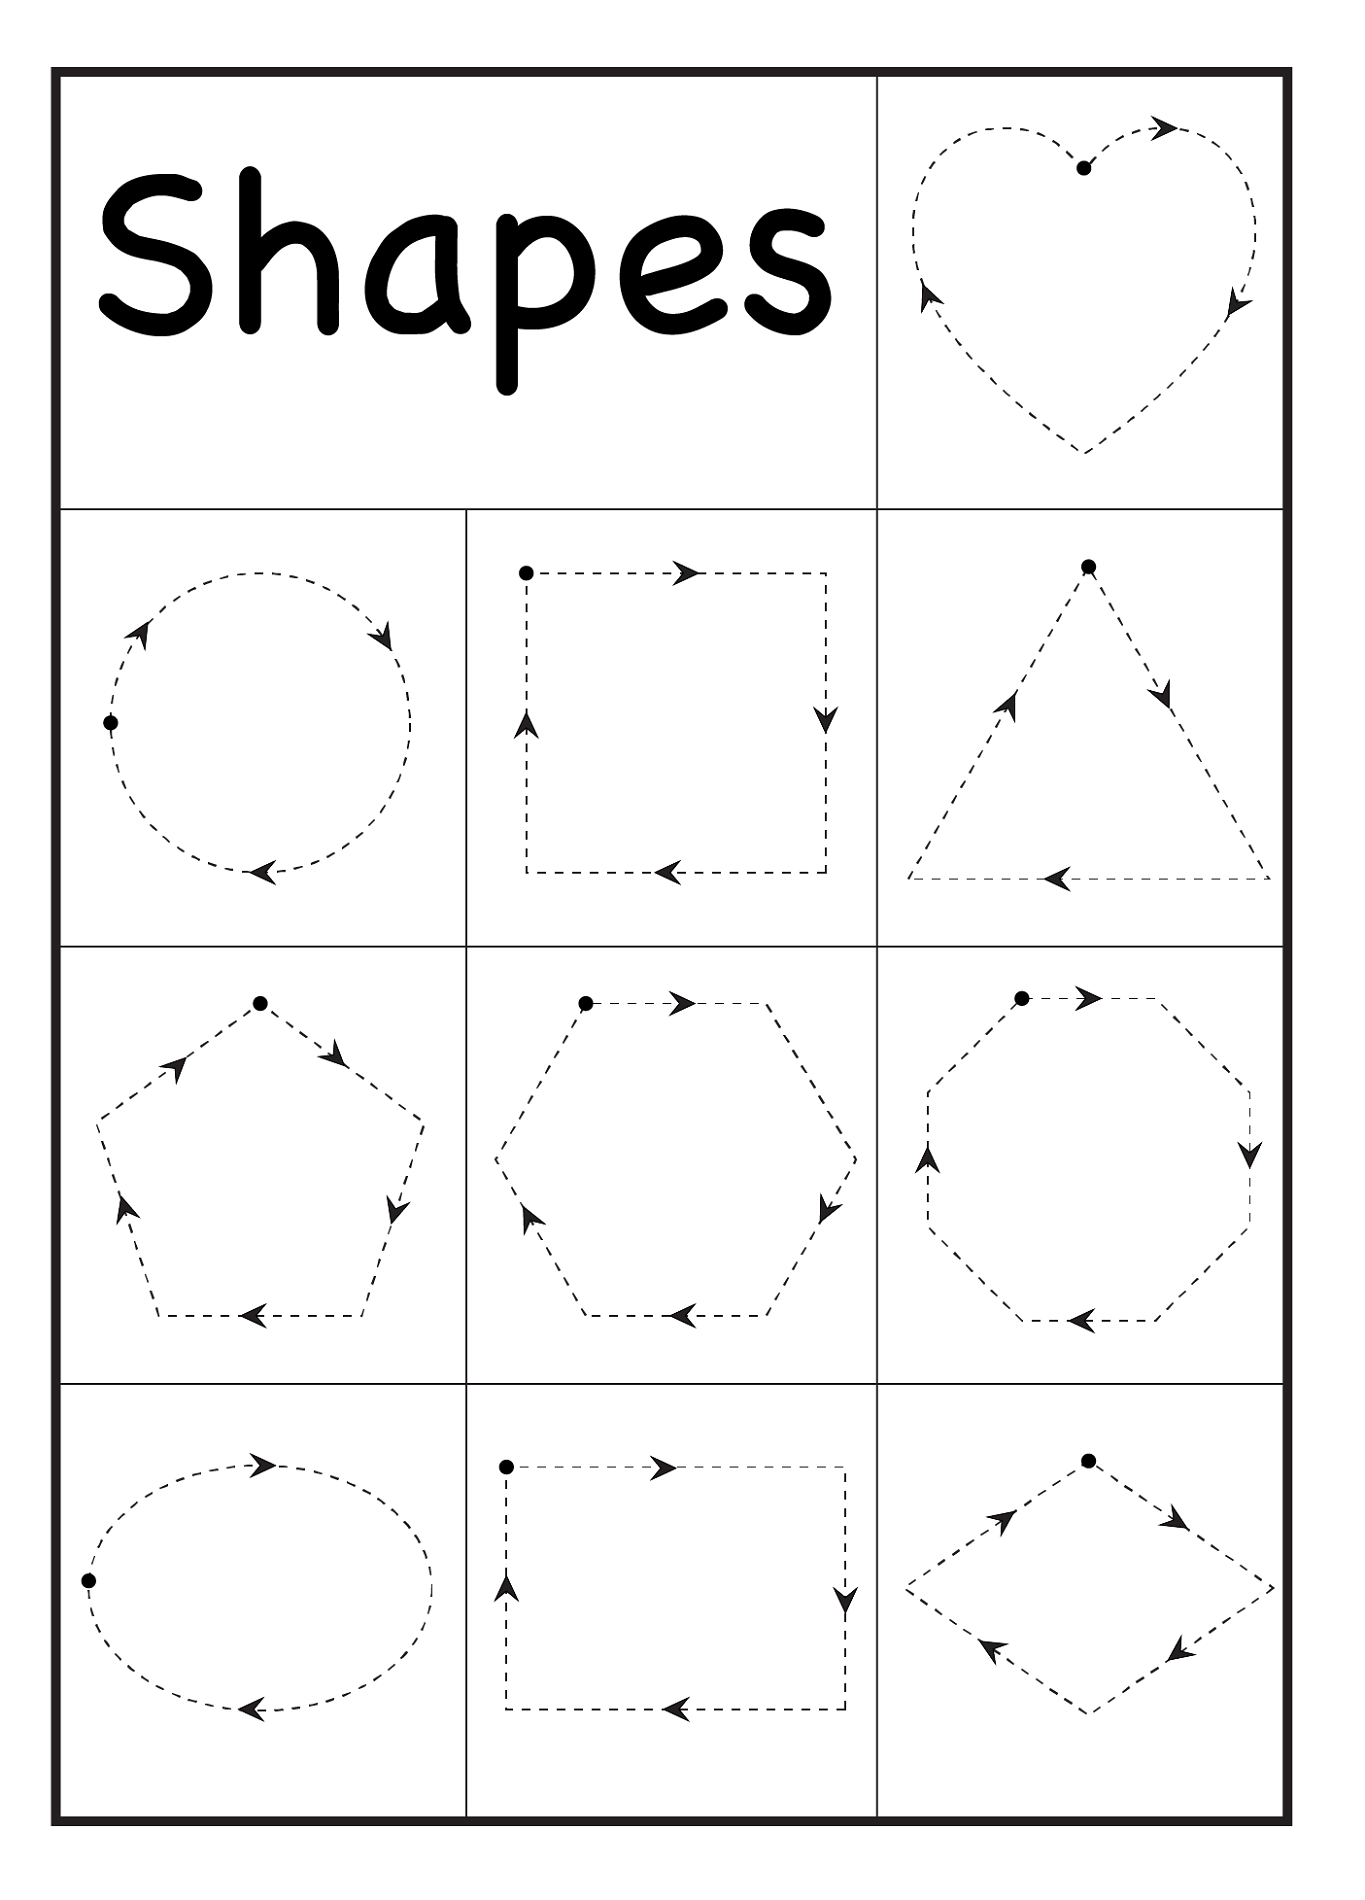 Worksheets For 3 Year Olds: Worksheets For 3 Years Old Kids in Alphabet Tracing Worksheets For 3 Year Olds